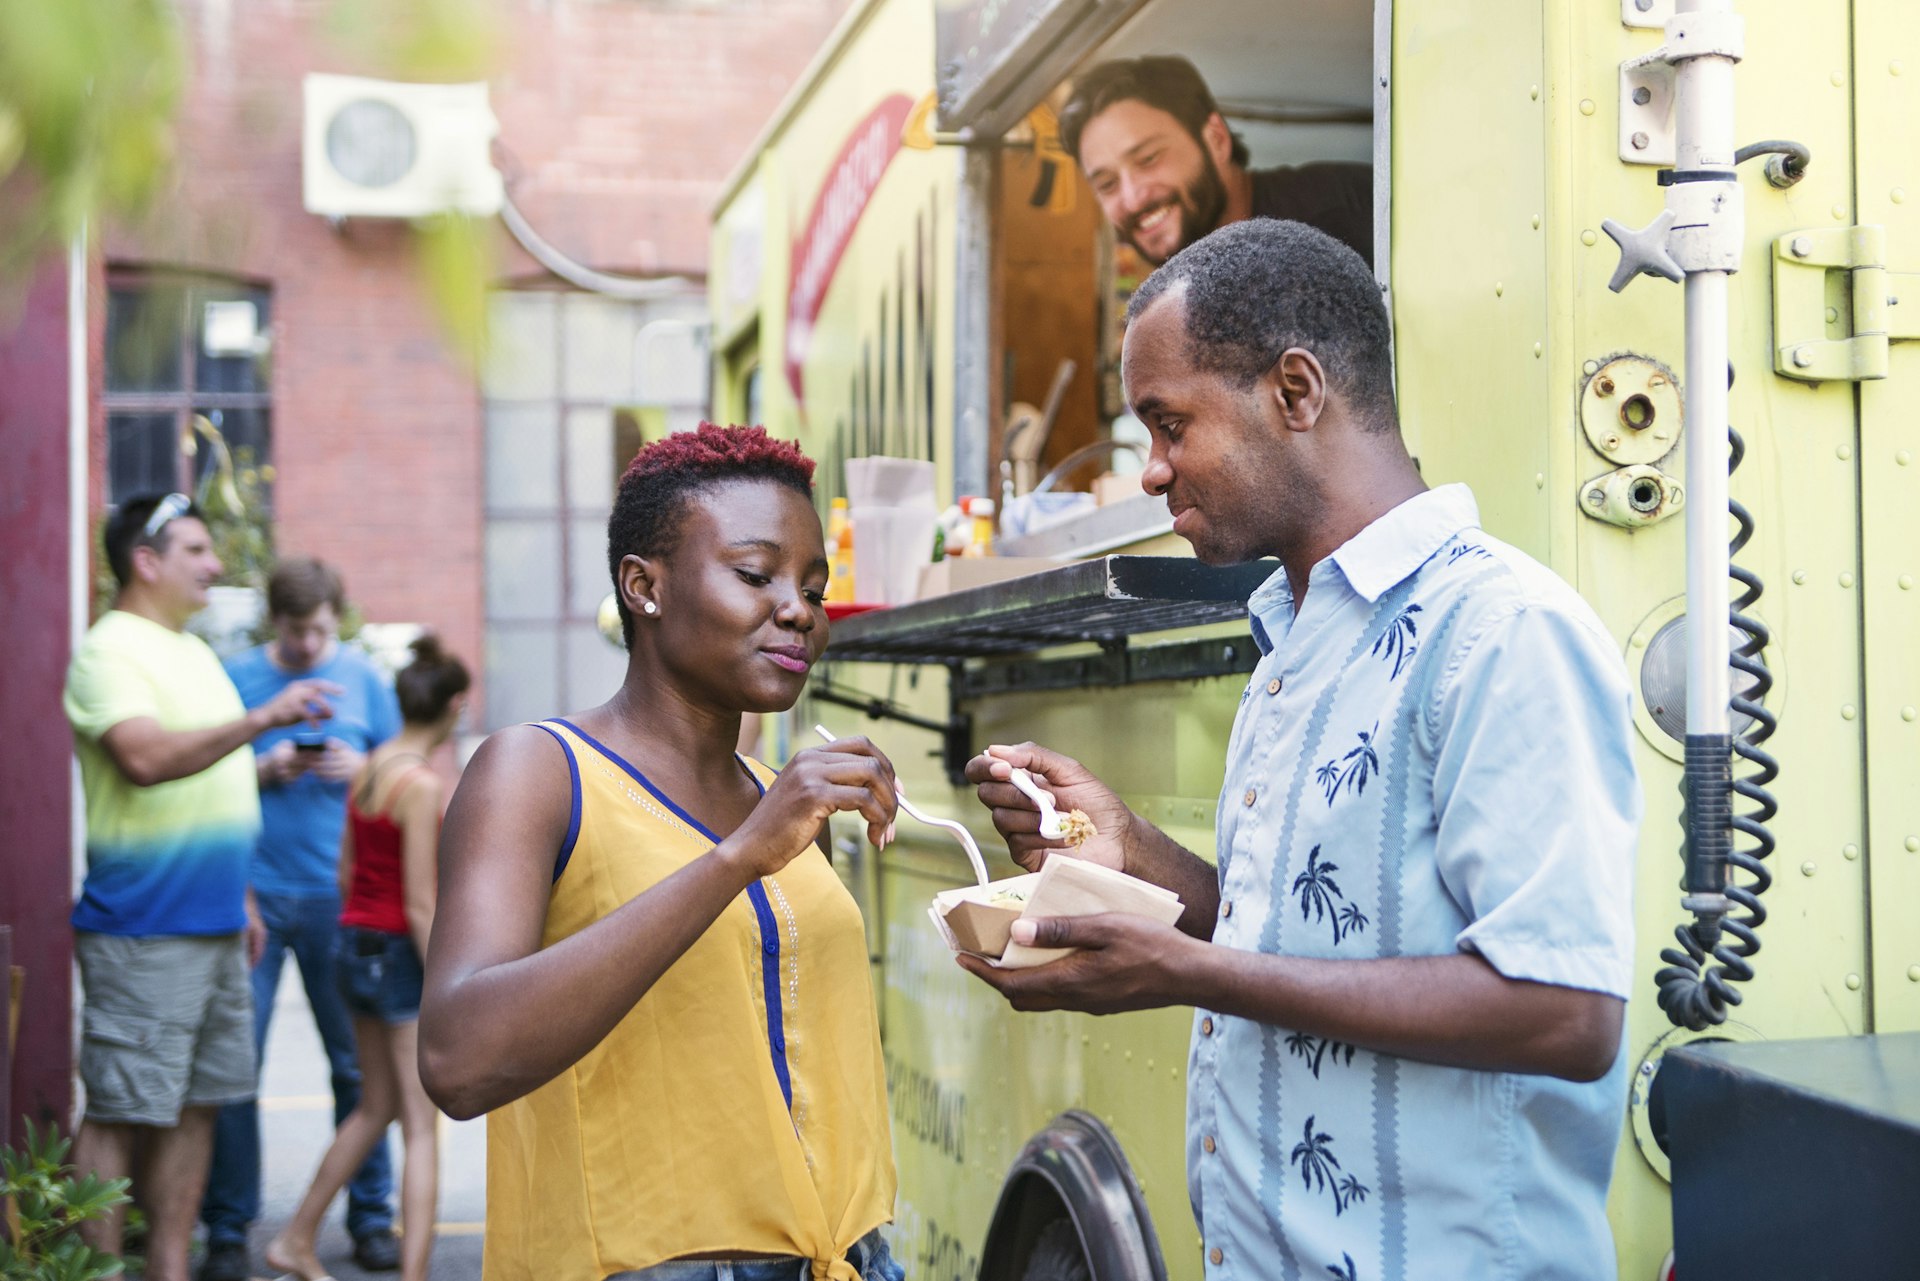 African-american couple enjoying their food from a food truck in city street. People in the background. Horizontal waist up outdoors shot with copy space. This was taken in Montreal, Canada.